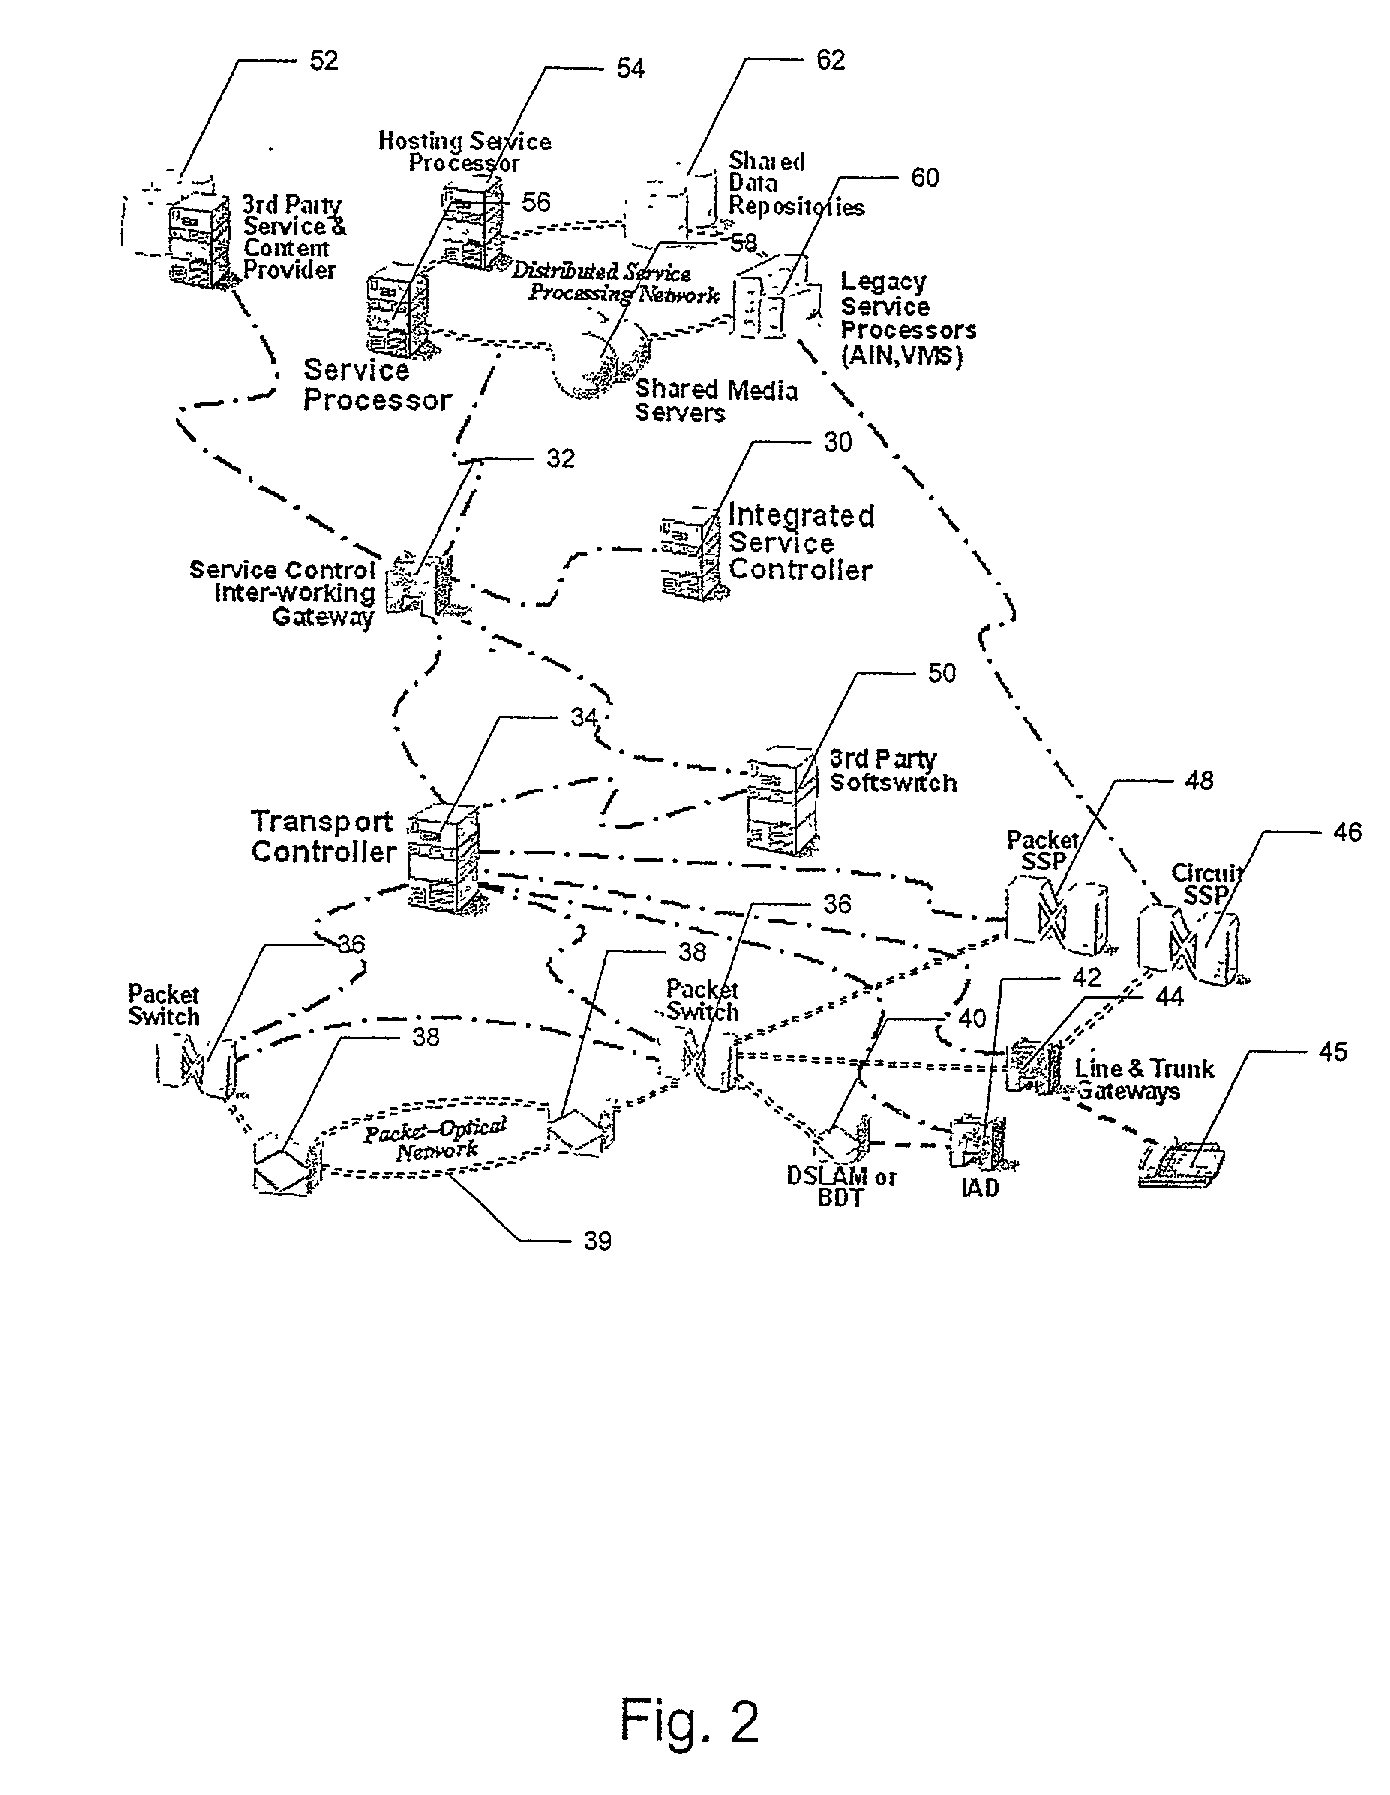 Method and system for dynamic service profile integration by a service controller